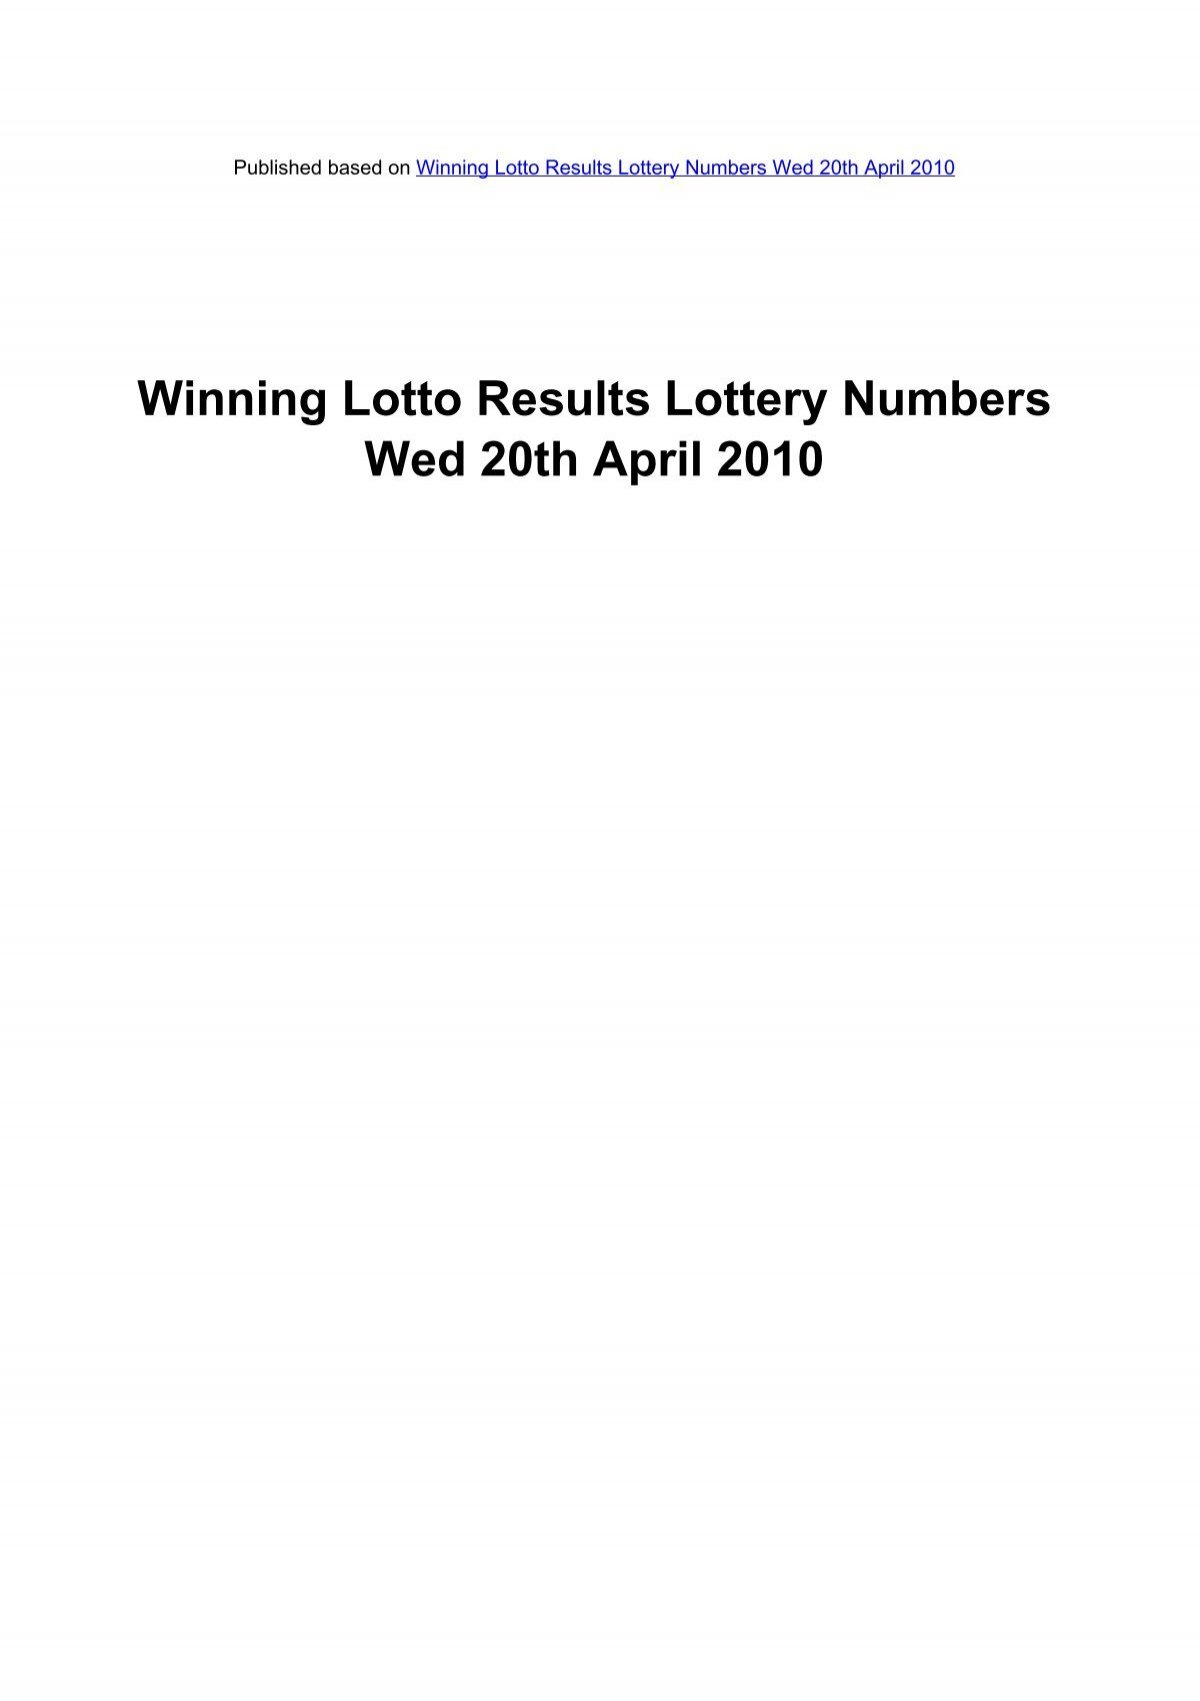 lotto numbers for saturday 20th july